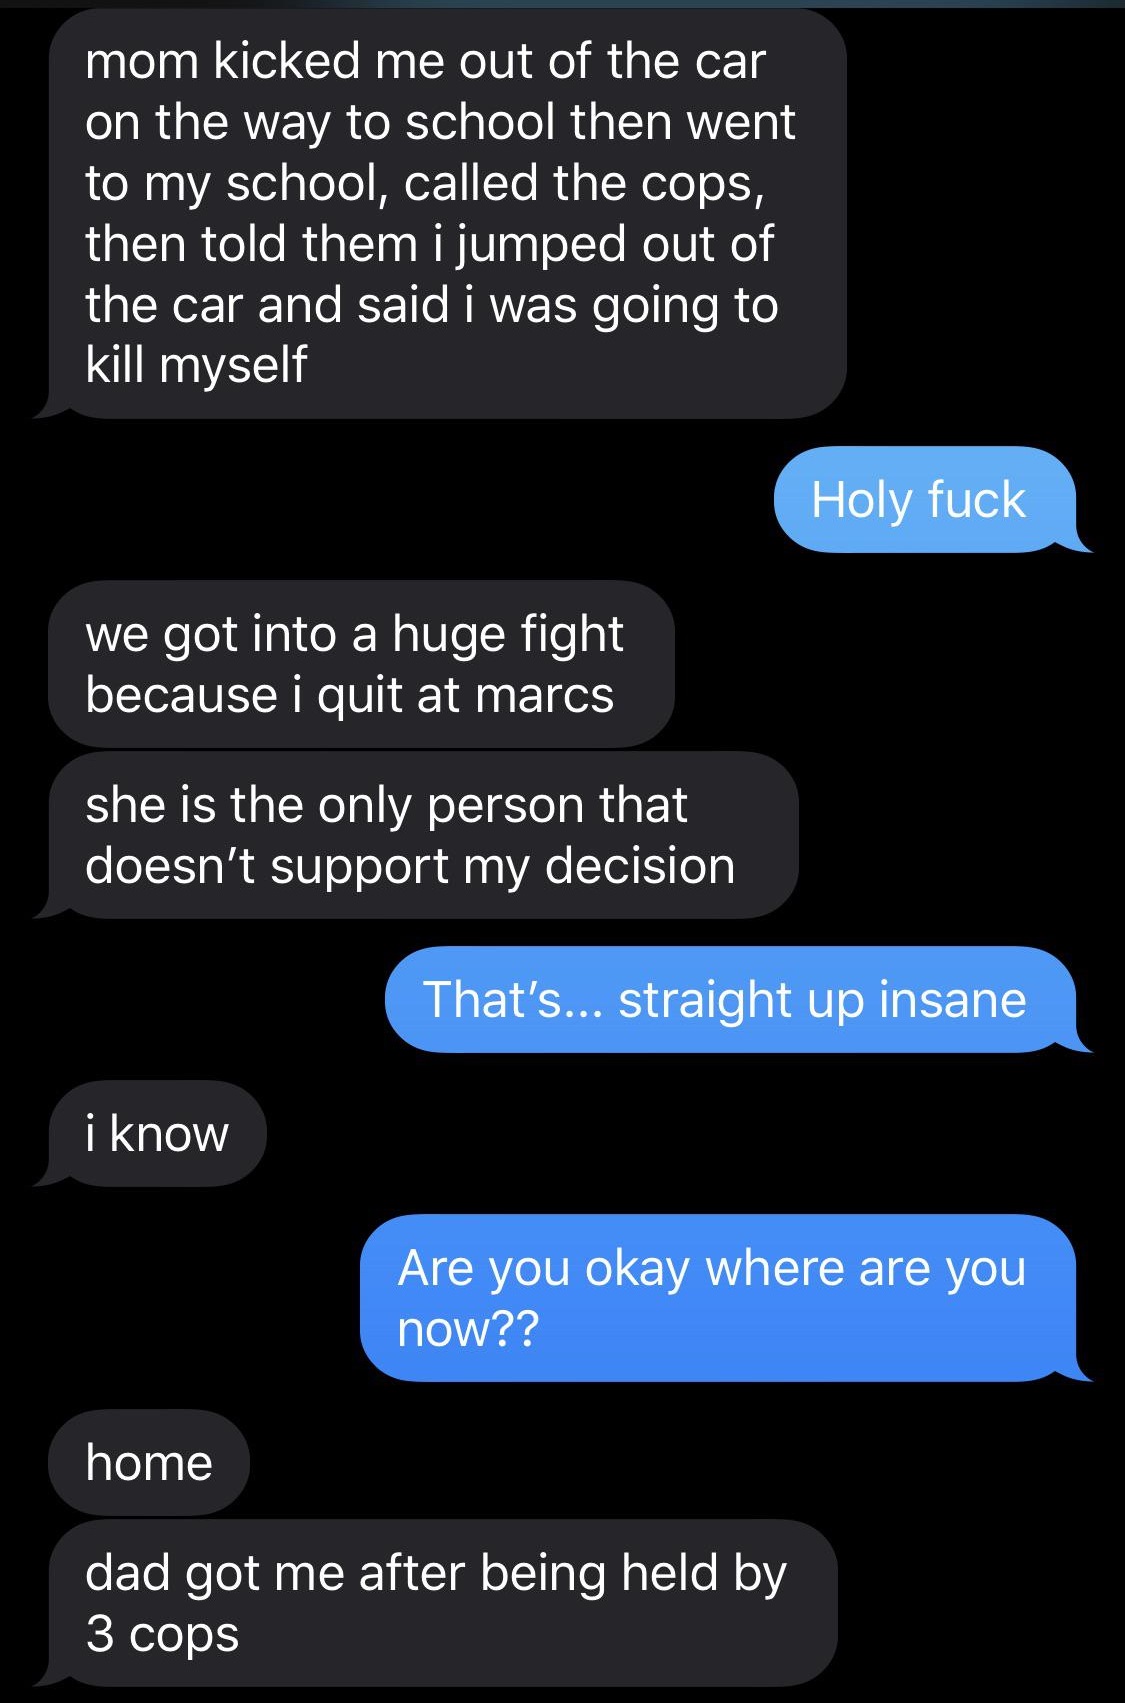 screenshot - mom kicked me out of the car on the way to school then went to my school, called the cops, then told them i jumped out of the car and said i was going to kill myself Holy fuck we got into a huge fight because i quit at marcs she is the only p